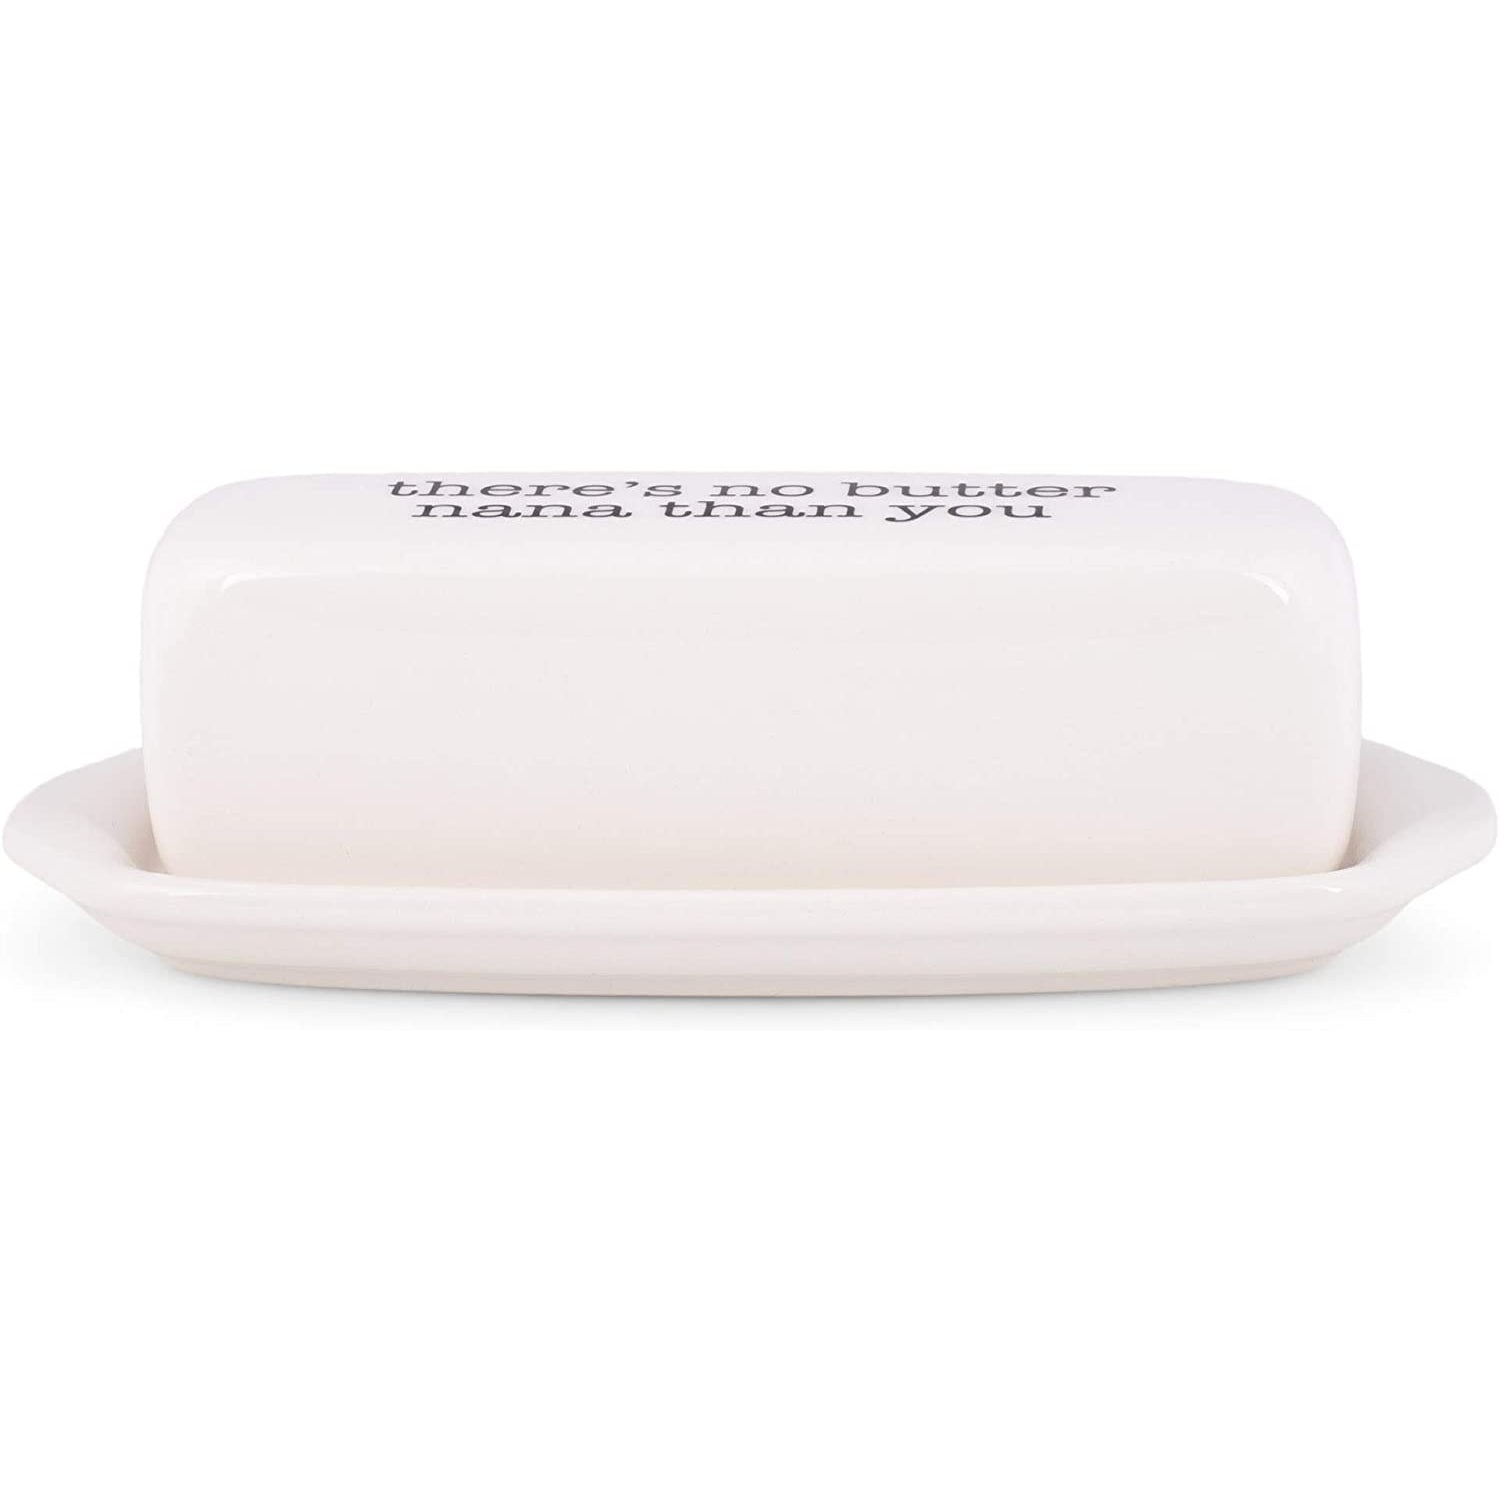 There's No Butter Nana Than You Butter Dish Tray with Lid | Ceramic 8.5"L x 3.5"W